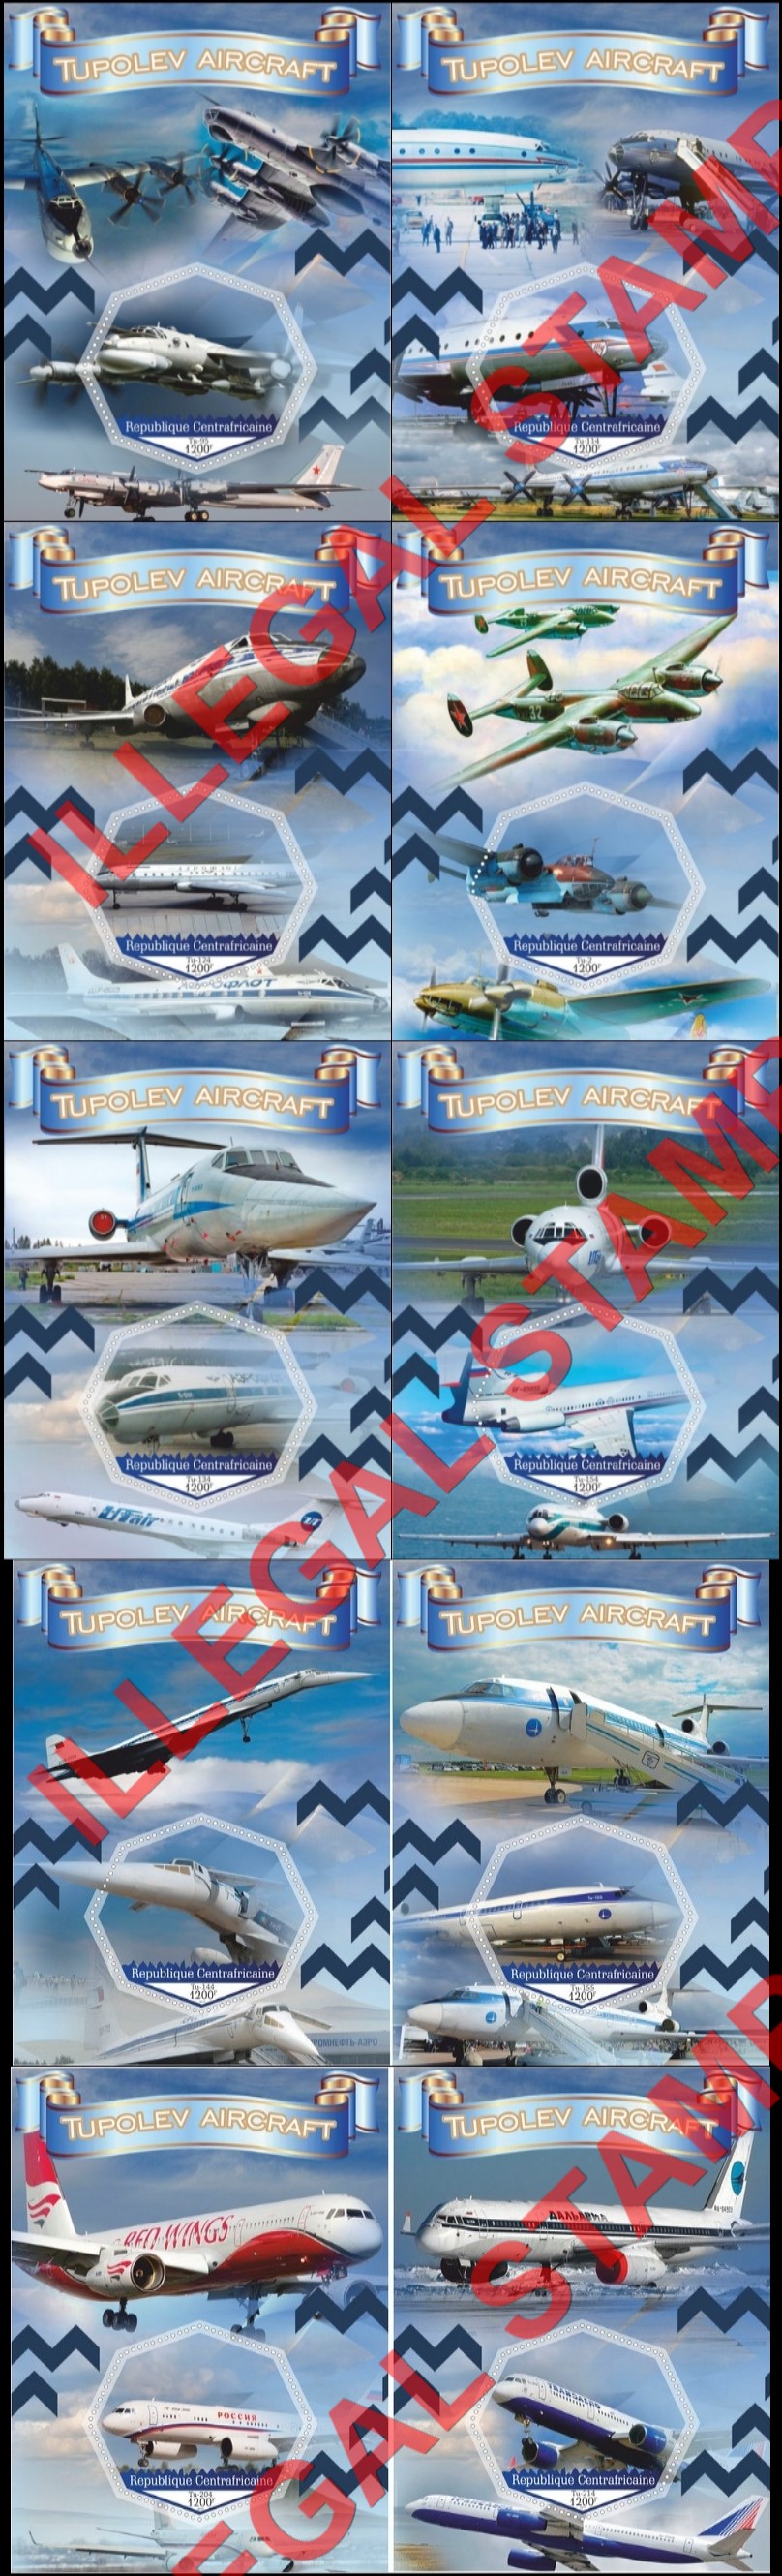 Central African Republic 2017 Tupolev Aircraft (different) Illegal Stamp Souvenir Sheets of 1